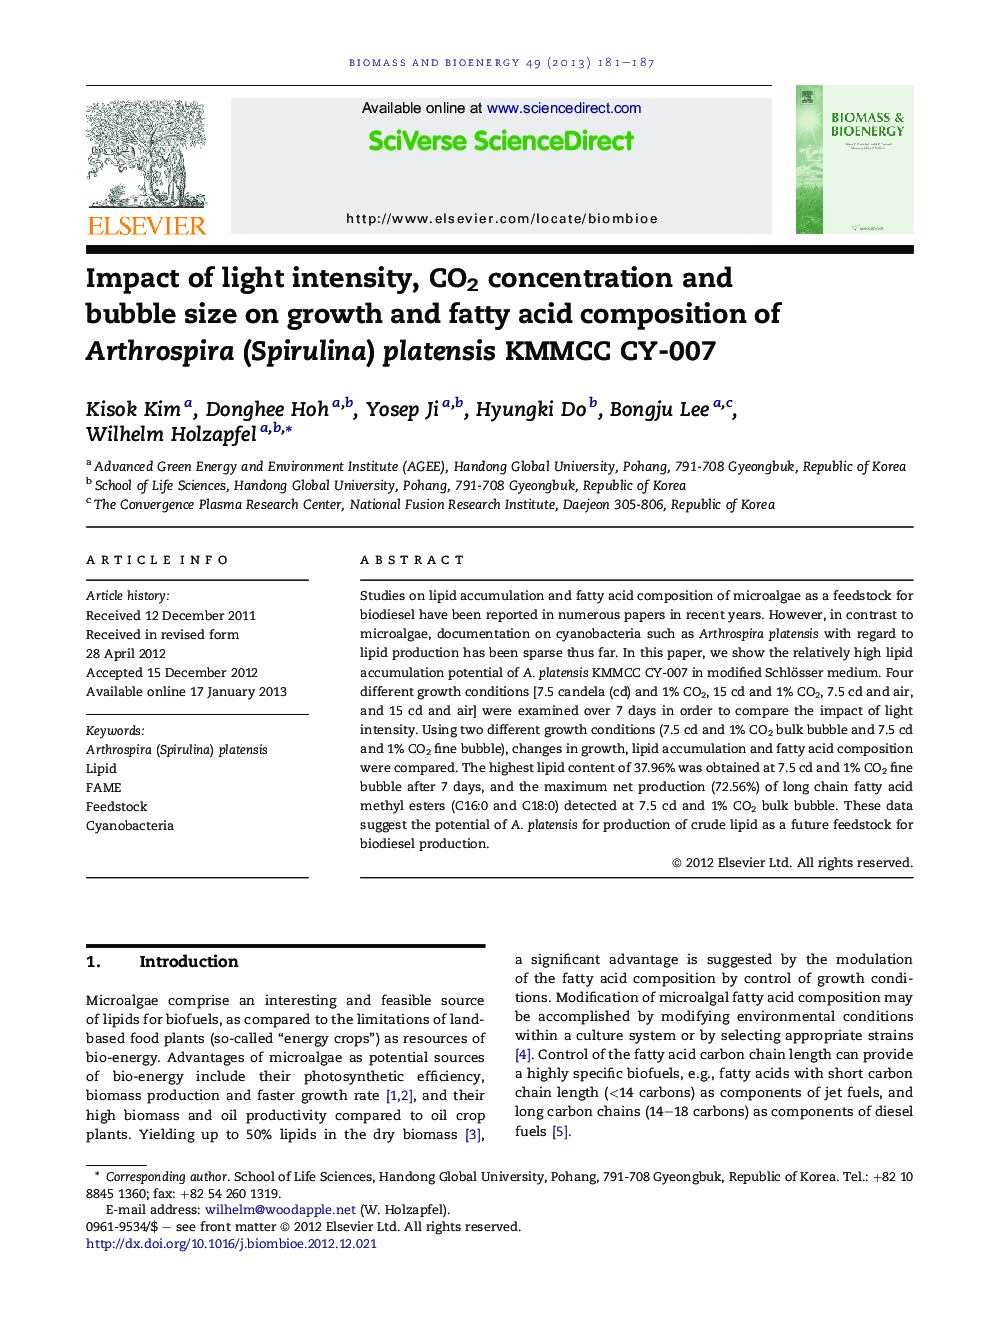 Impact of light intensity, CO2 concentration and bubble size on growth and fatty acid composition of Arthrospira (Spirulina) platensis KMMCC CY-007